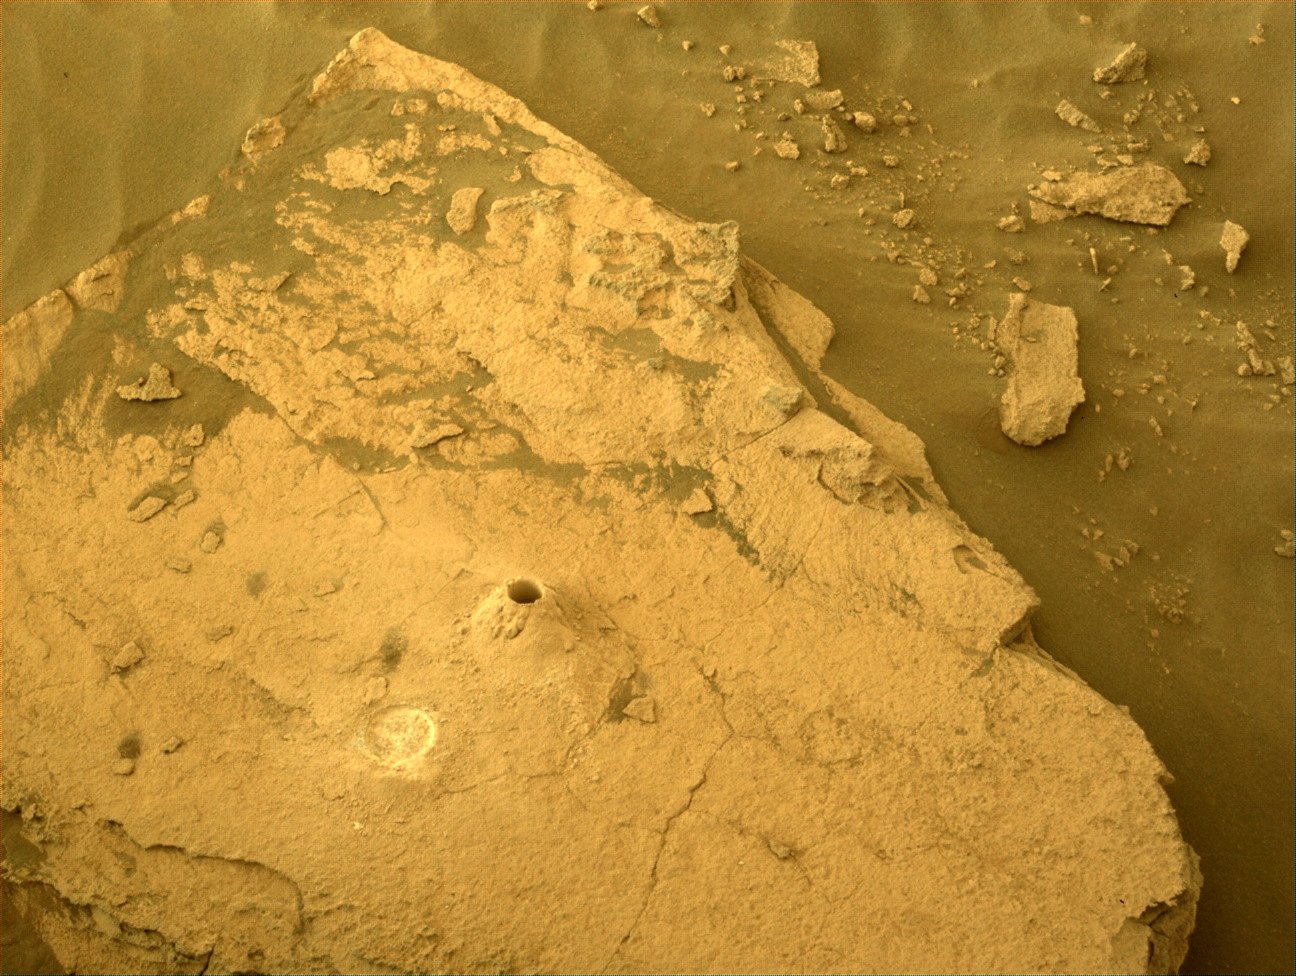 Perseverance rover scoops up a sample from the Jezero delta